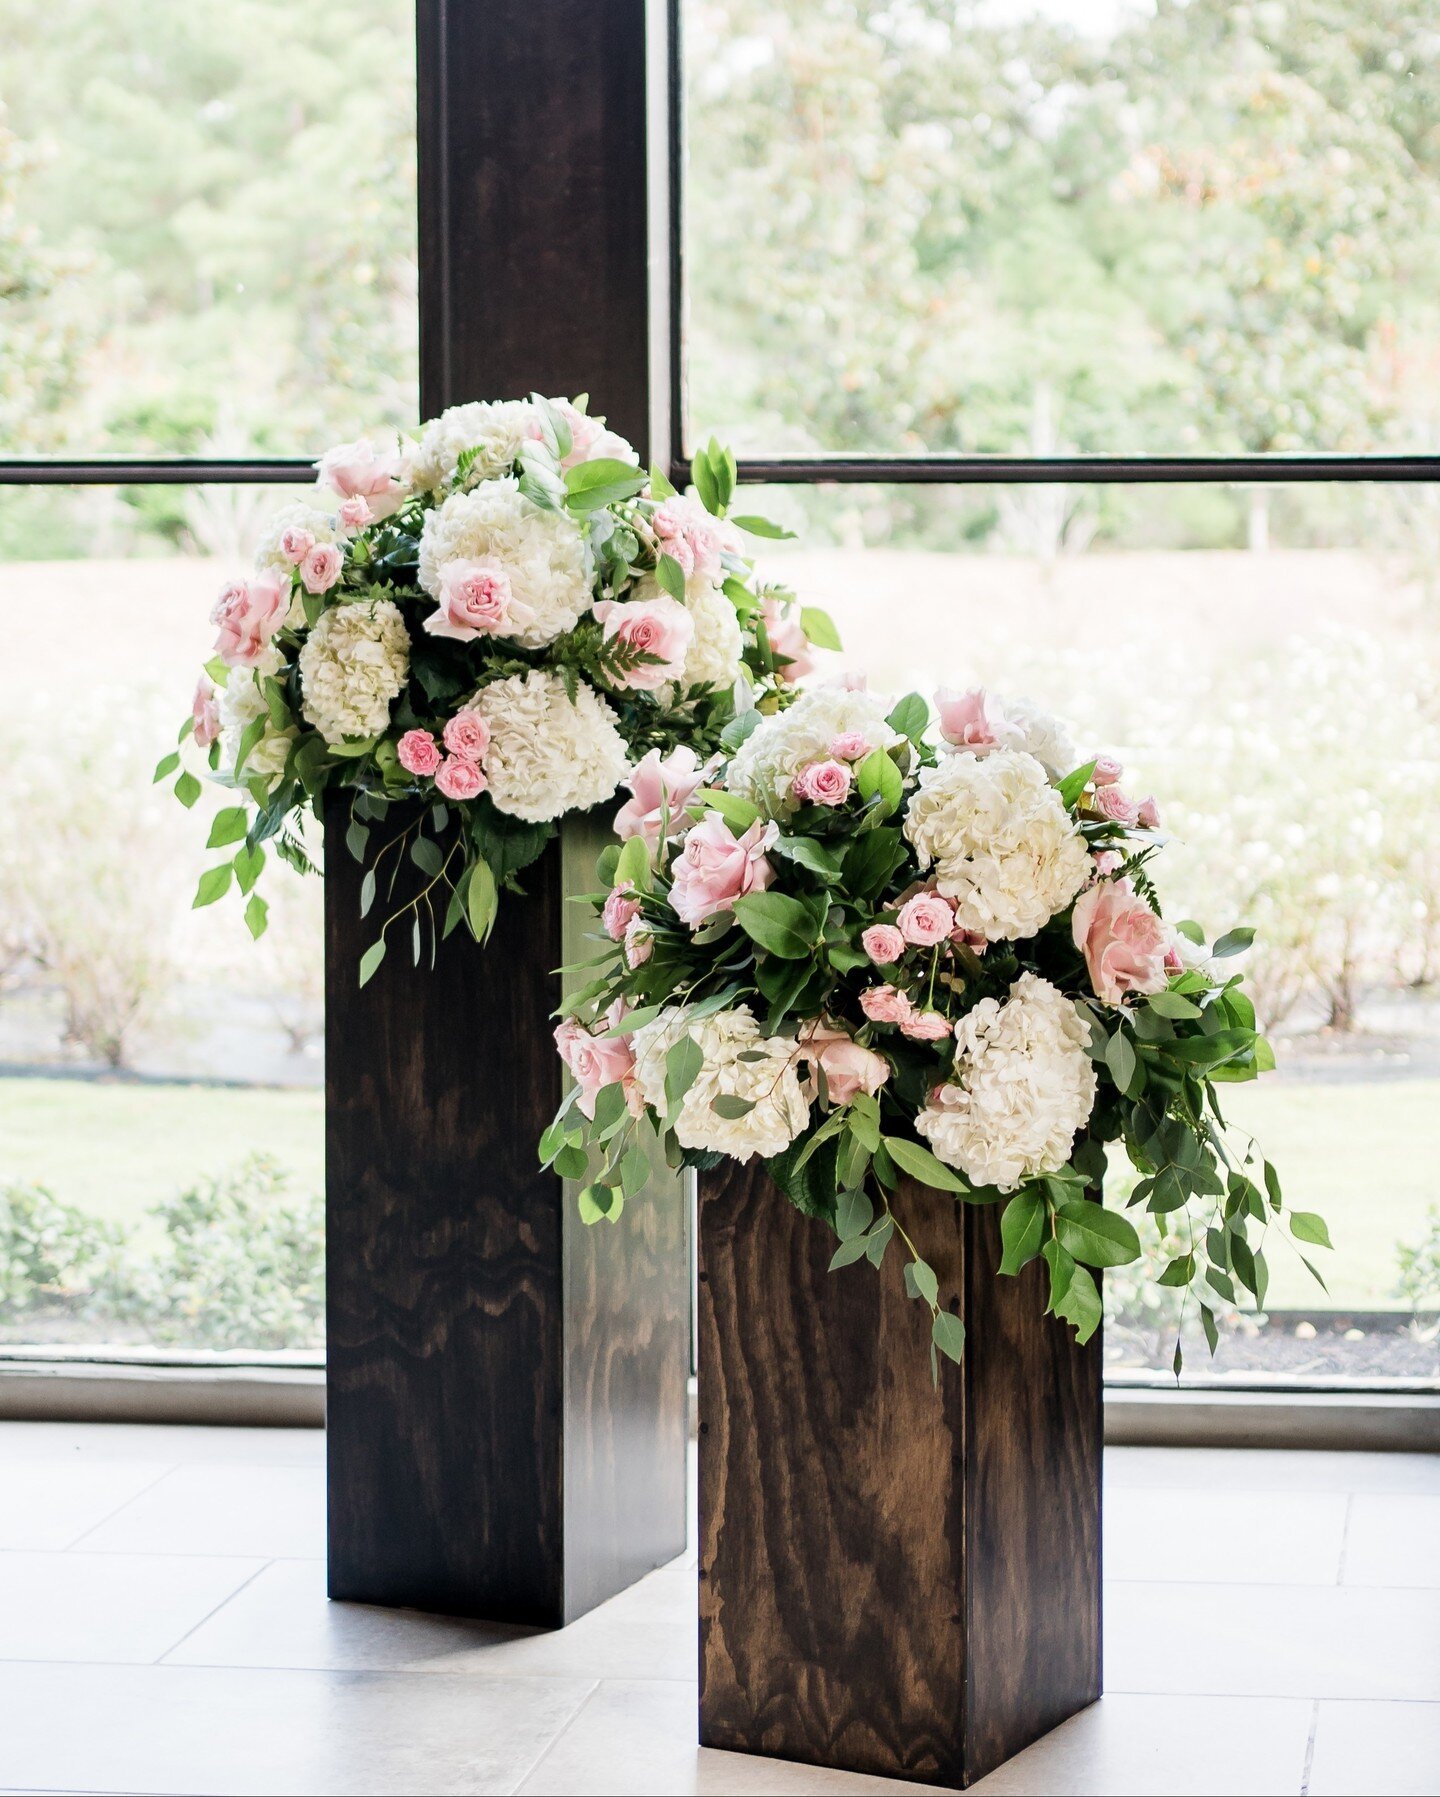 Blossoming love at every petal. Transforming vows into a garden of dreams with enchanting wedding florals 🌸💍✨

Venue @ironmanortx
Photography @emilychappellproductions 

#waltersweddingestates #thedesignhaus #luxuryweddings #weddingflorals #wedding